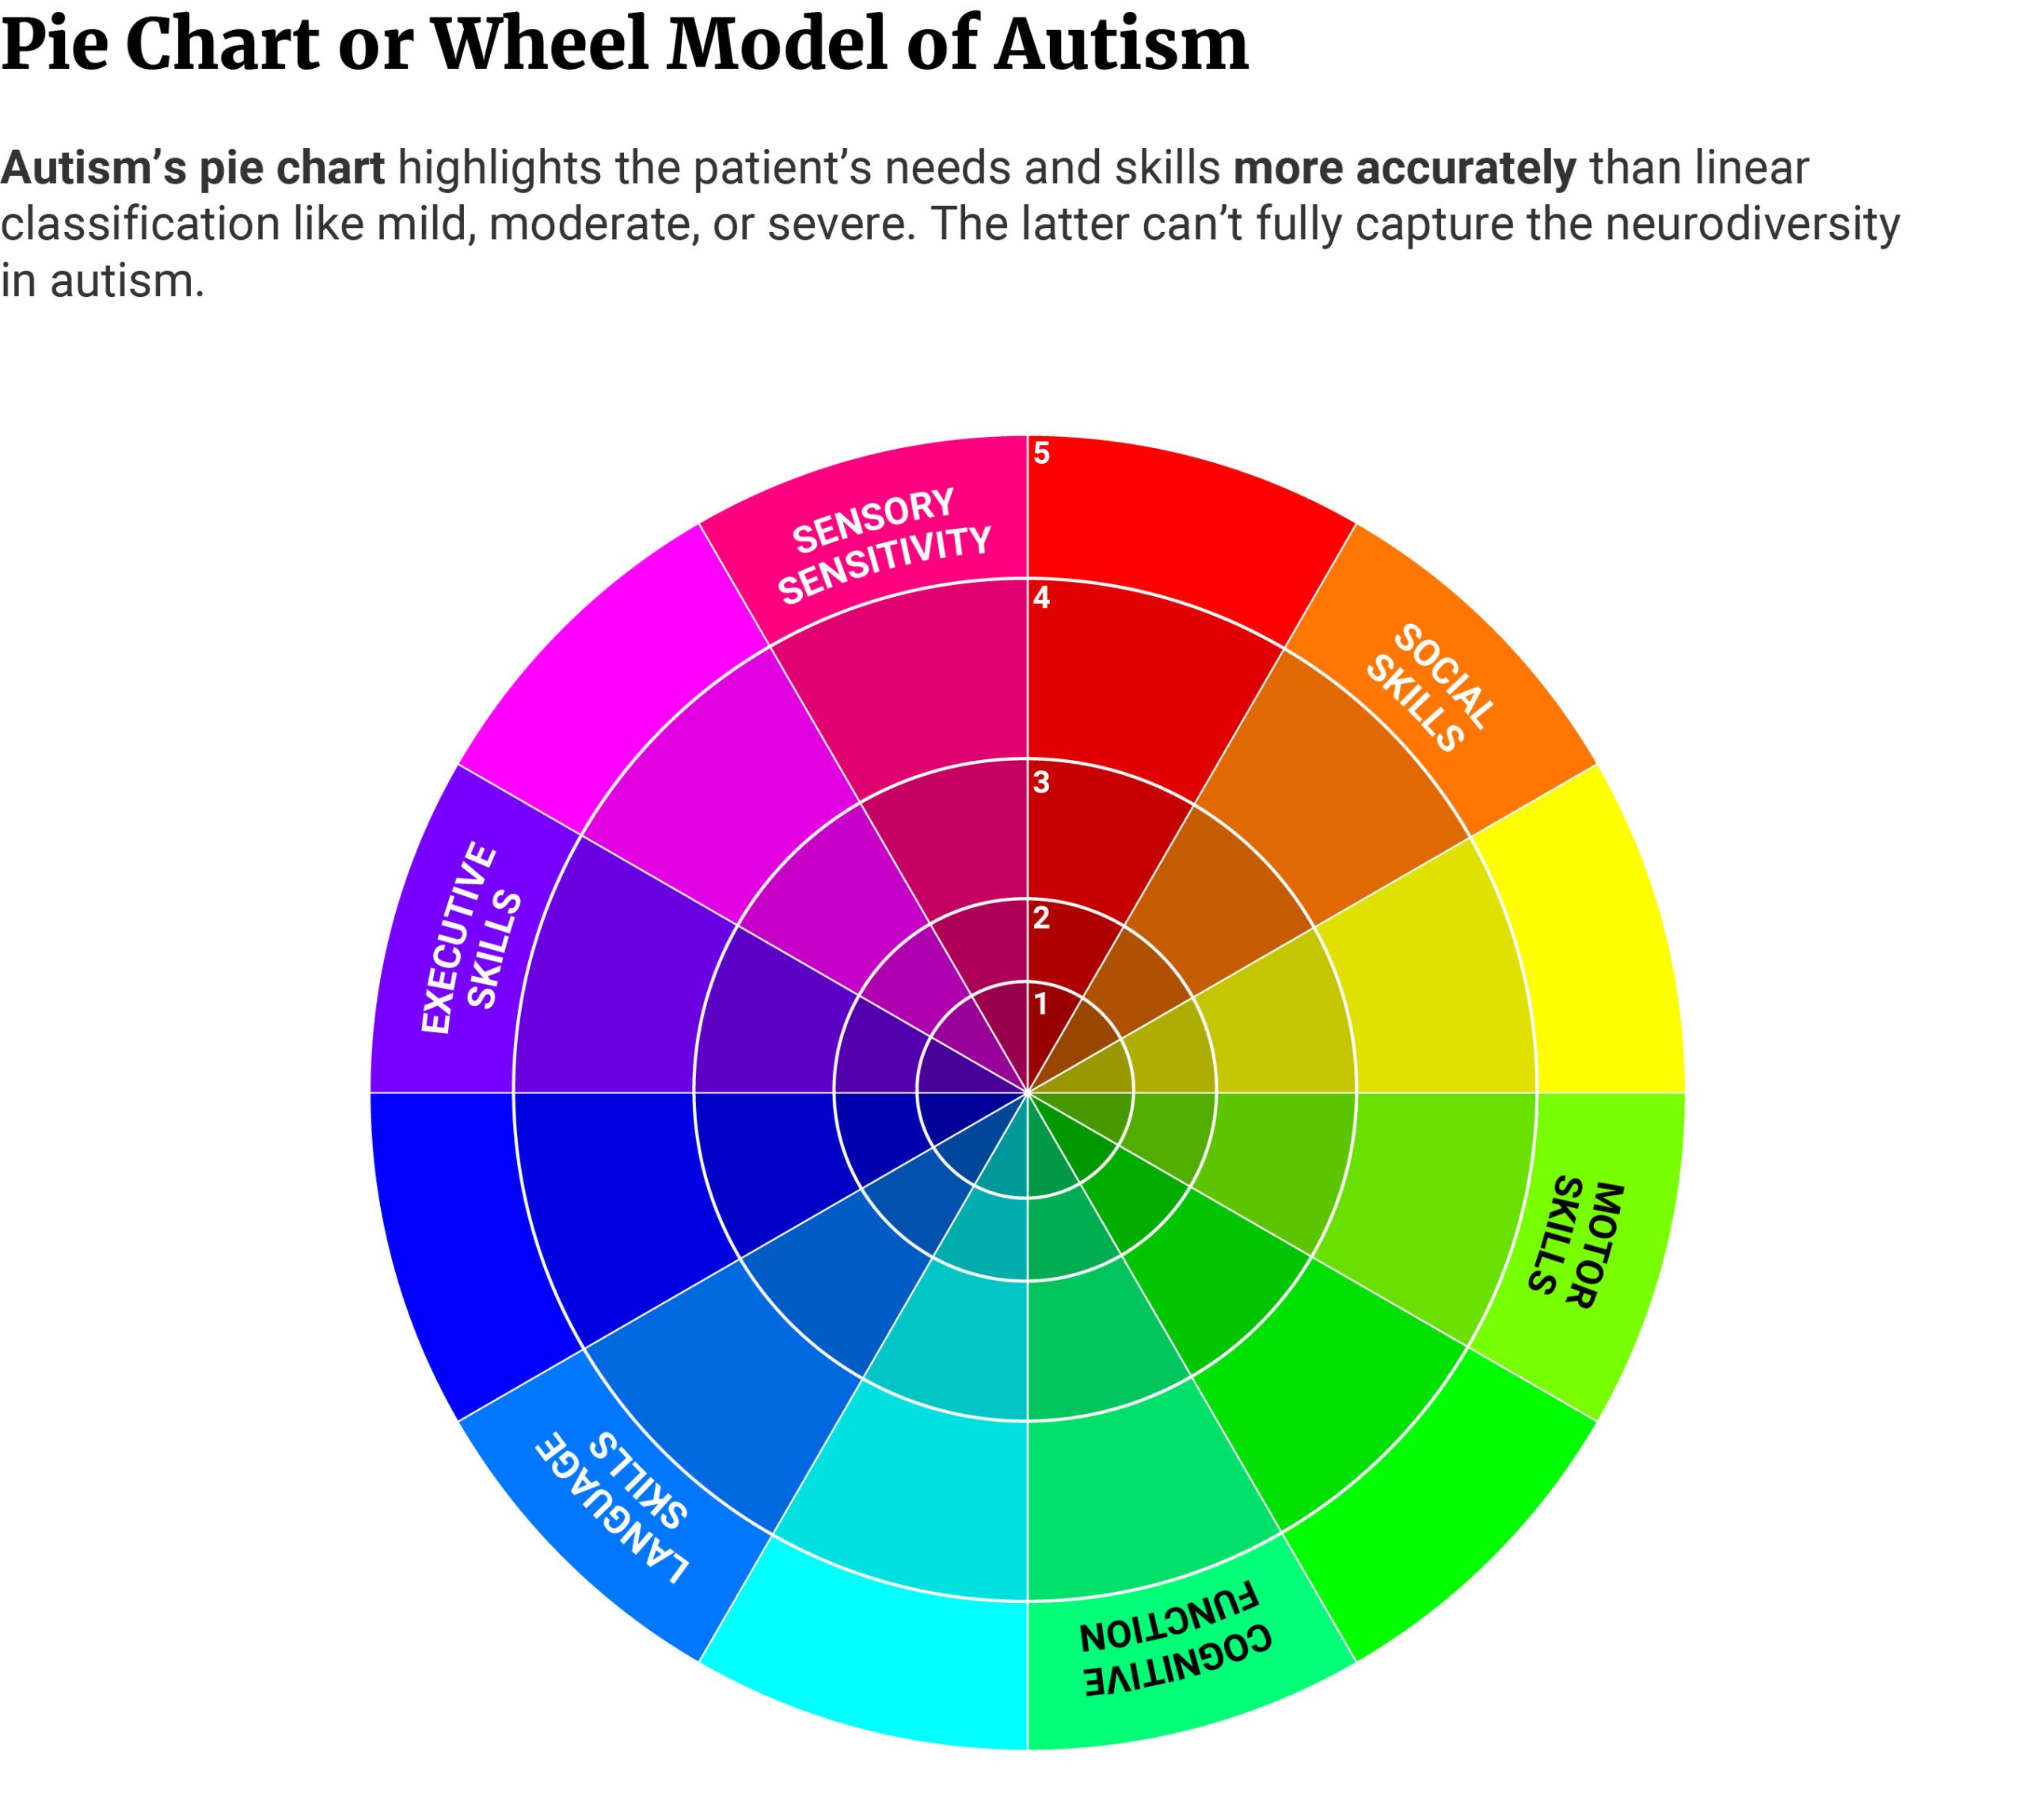 Wheel or pie chart model (we can just use 6 colors ROYGBI and 5 concentric circles with numbers 1 (innermost) through 5 (outermost).